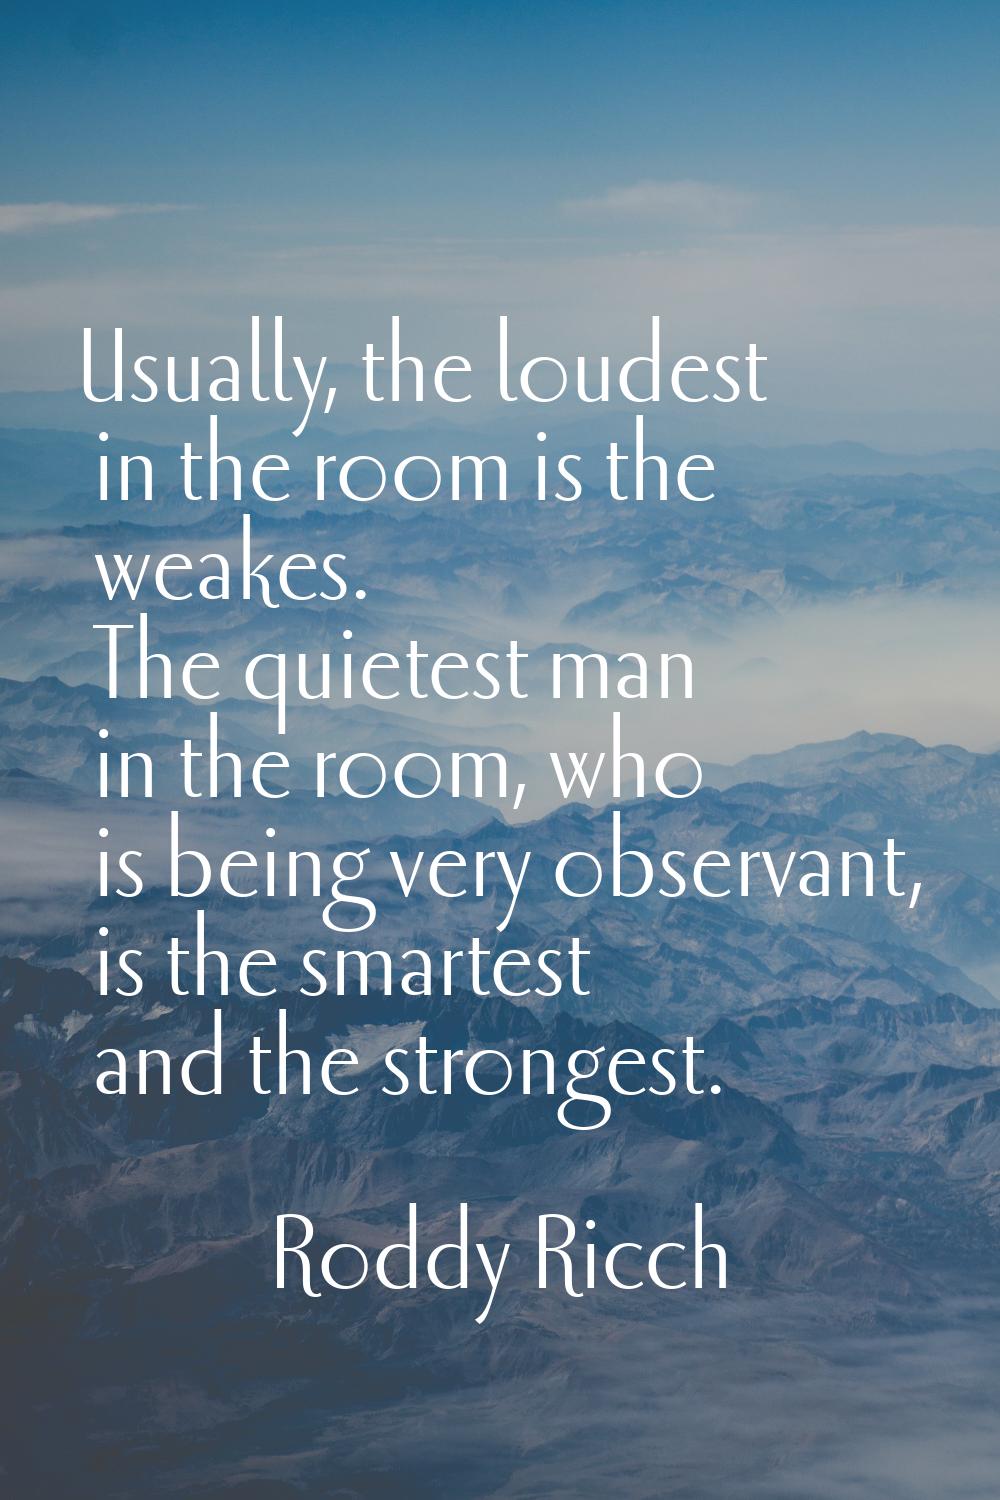 Usually, the loudest in the room is the weakes. The quietest man in the room, who is being very obs